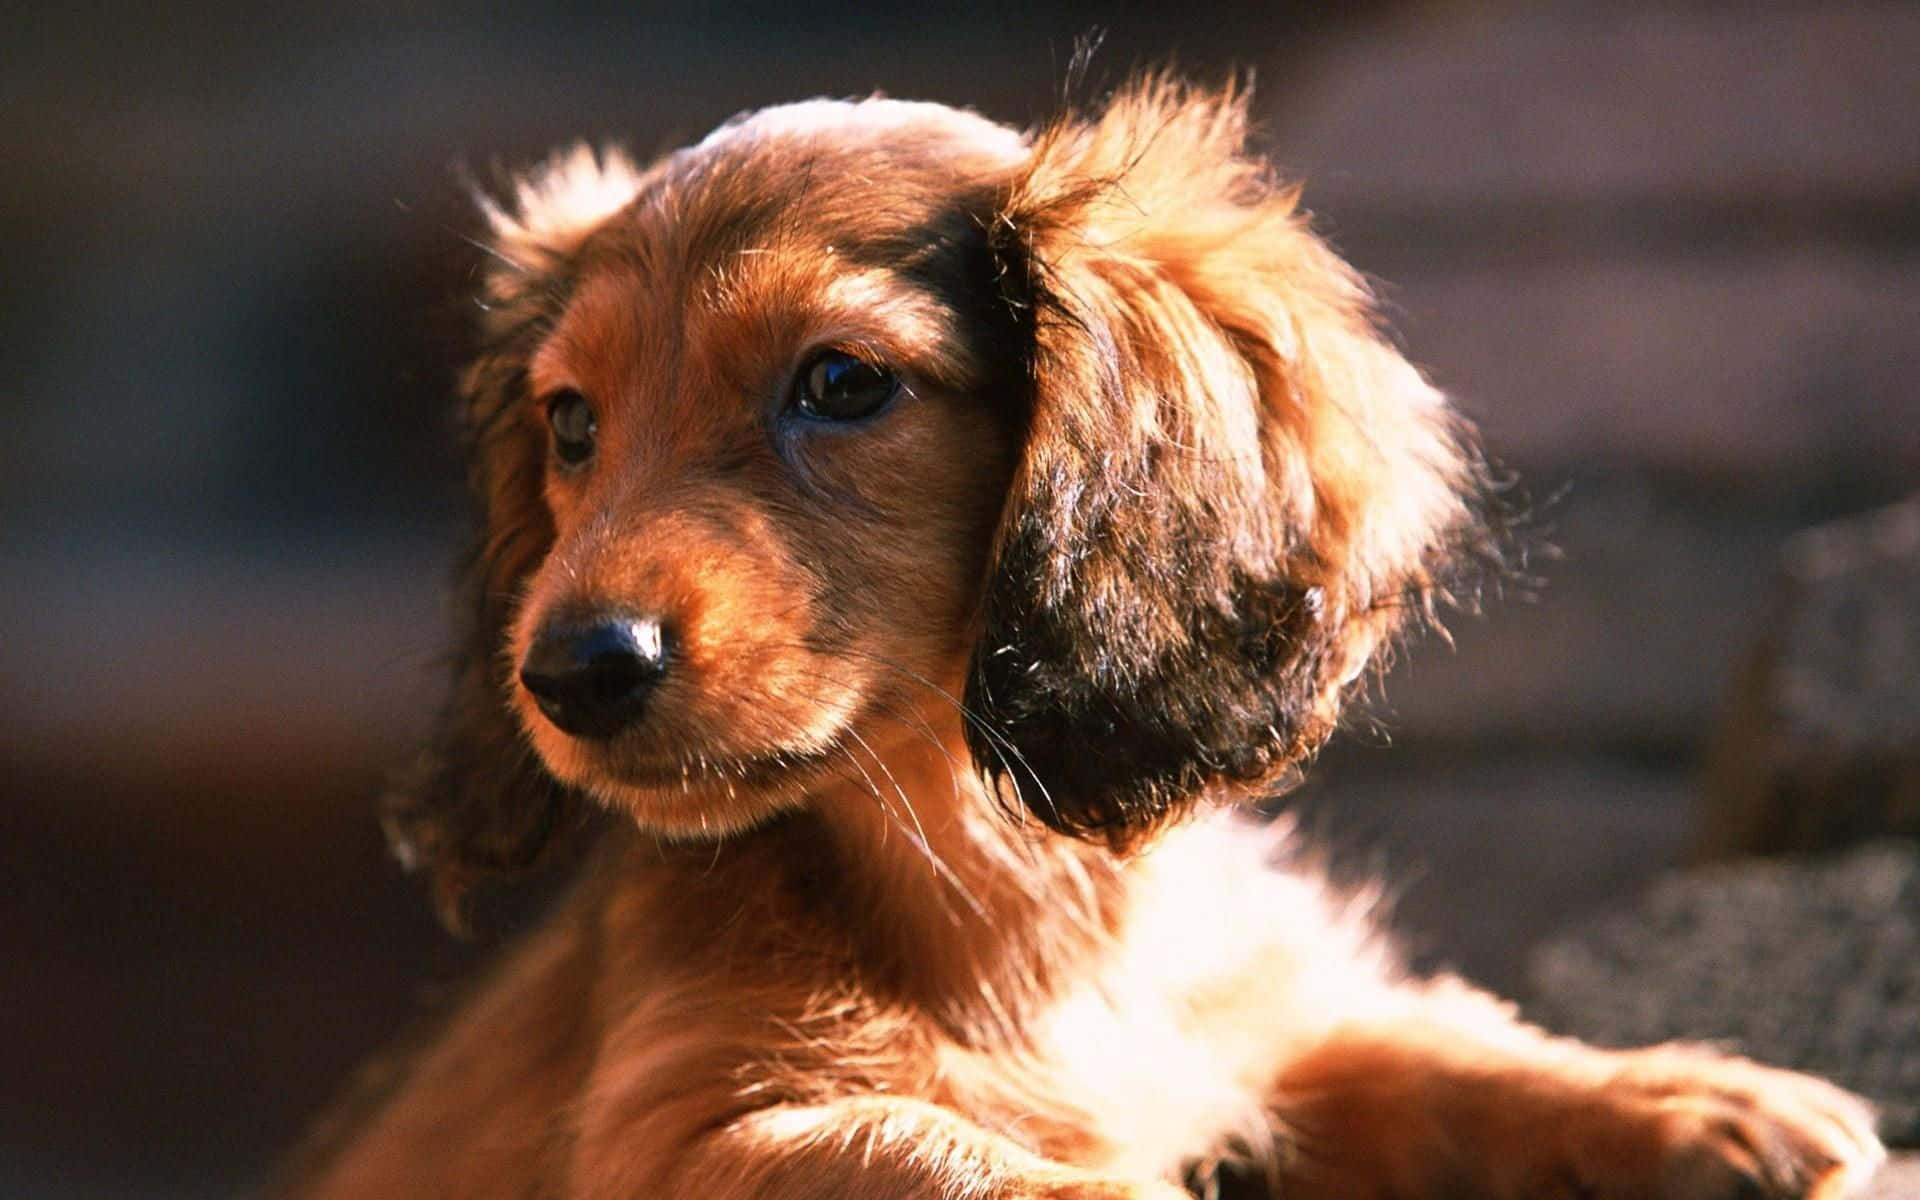 This dachshund has an amazing personality